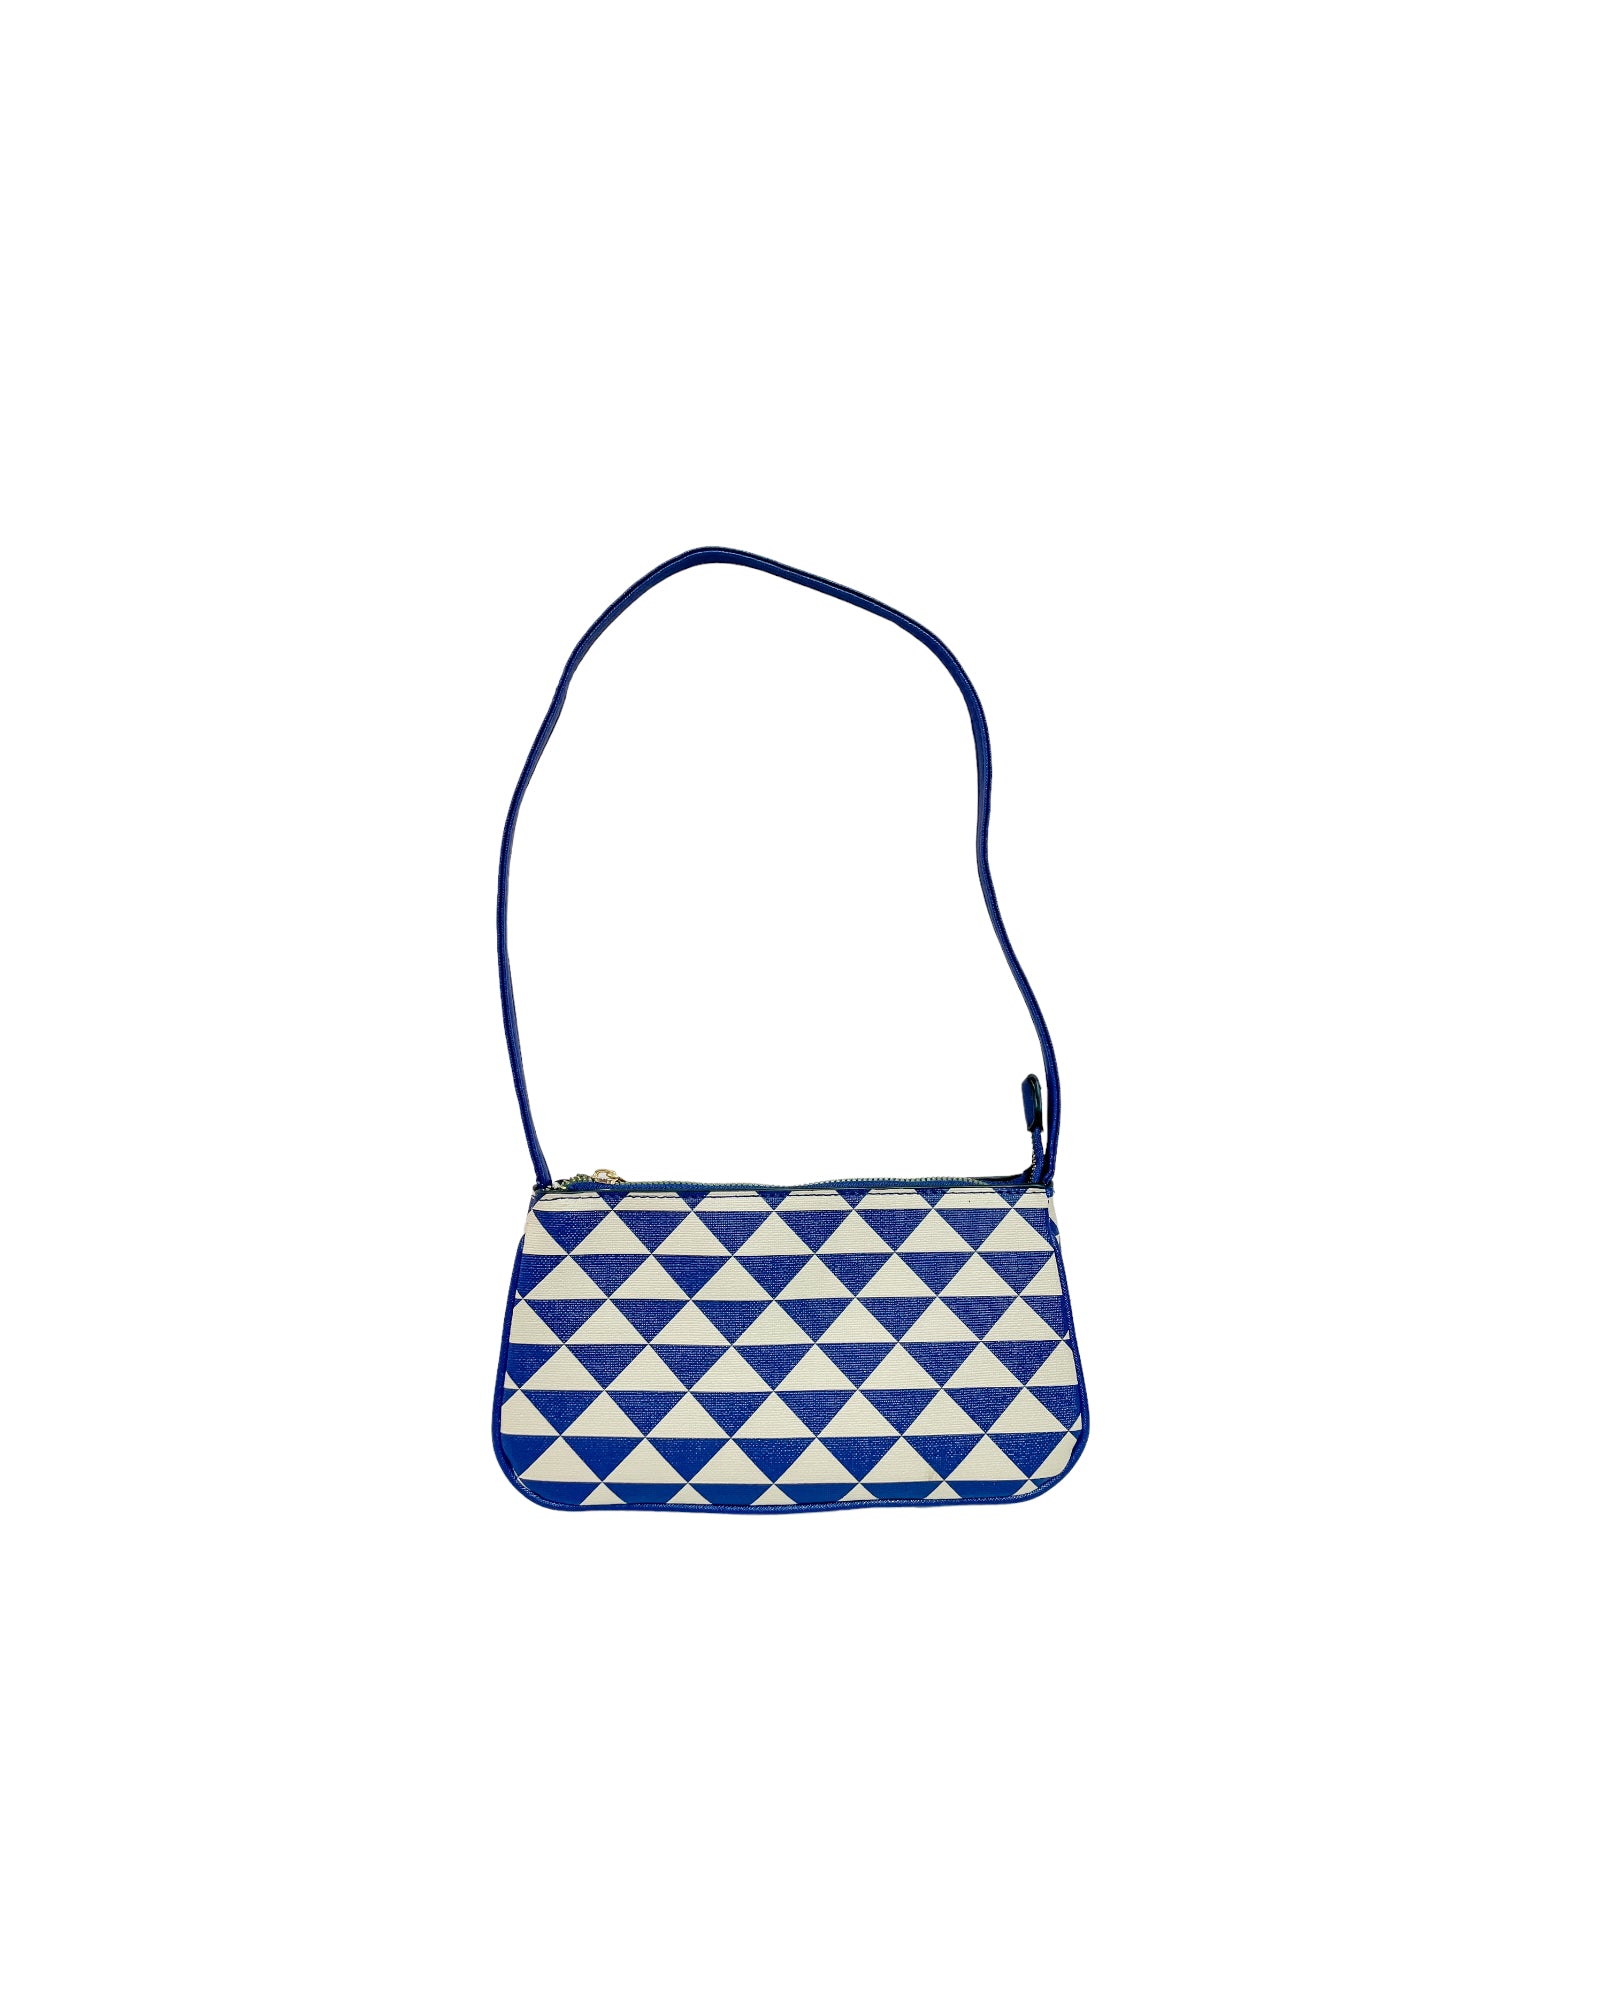 Fun Time Out Purse, Navy